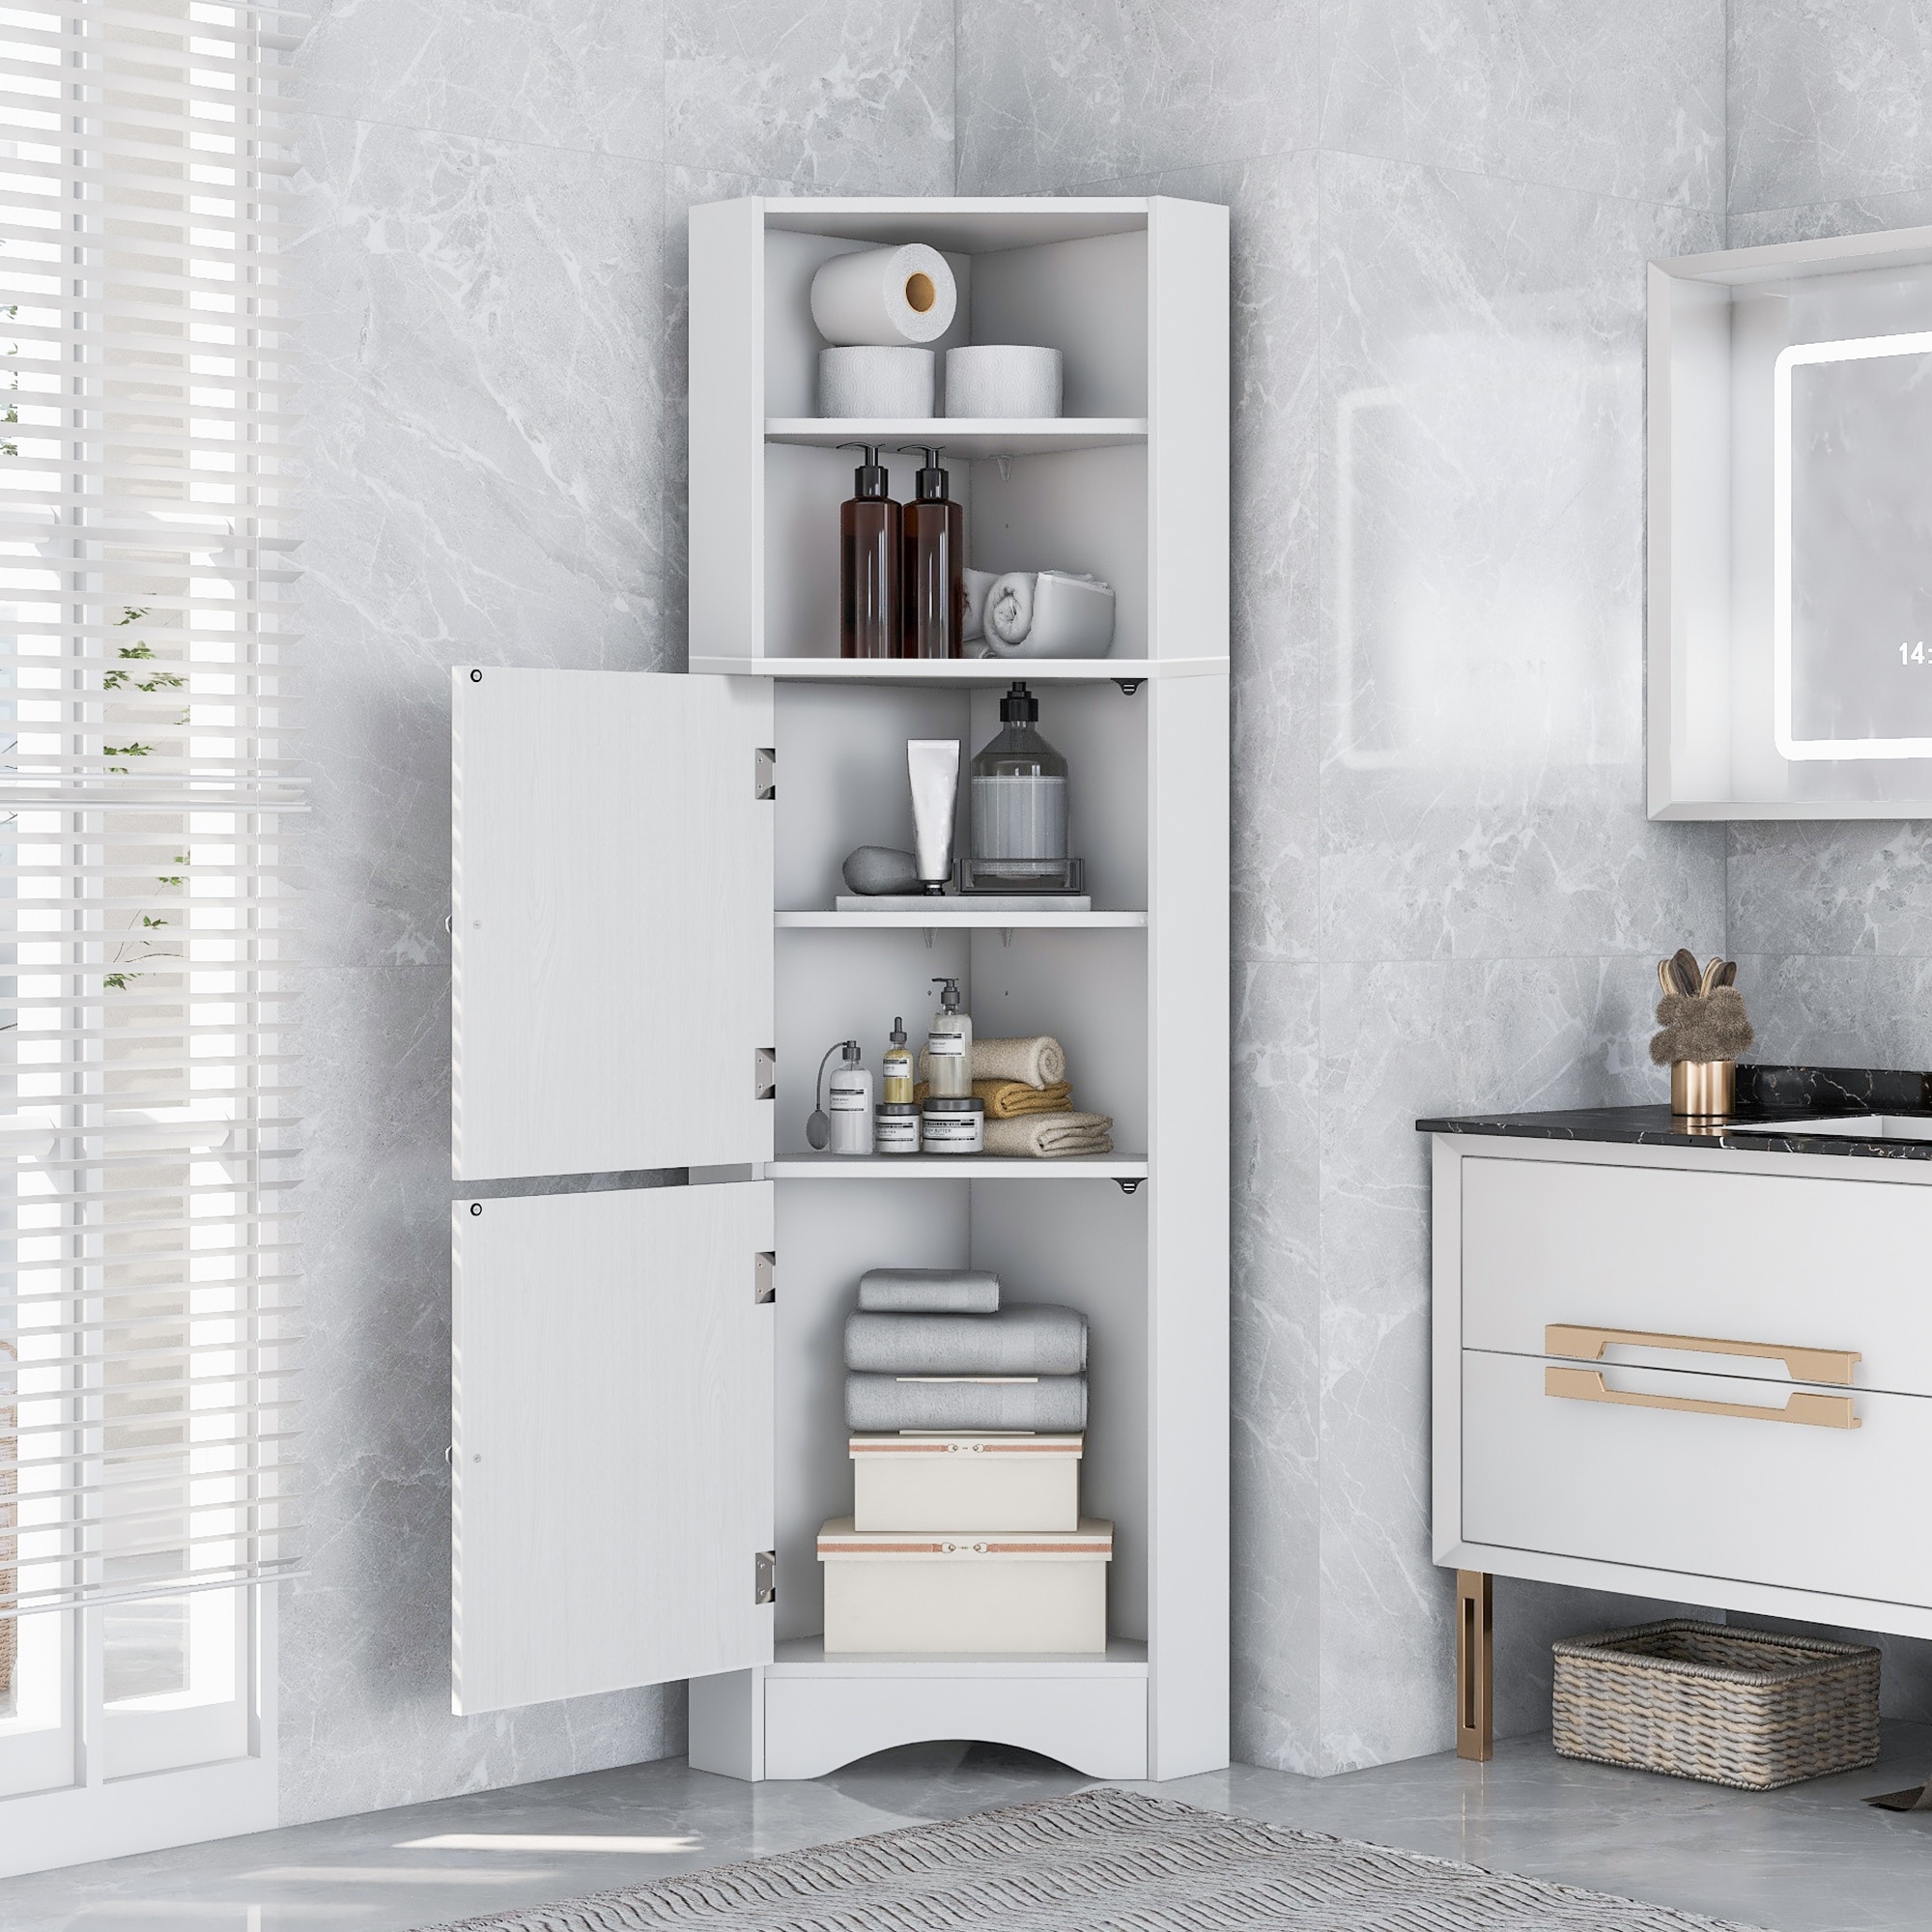 https://ak1.ostkcdn.com/images/products/is/images/direct/f0a5a40df133bb7761d9ccd2ec841dbda0f5a79a/Bathroom-Tall-Corner-Cabinet-with-Doors-and-Adjustable-Shelves%2CWhite.jpg